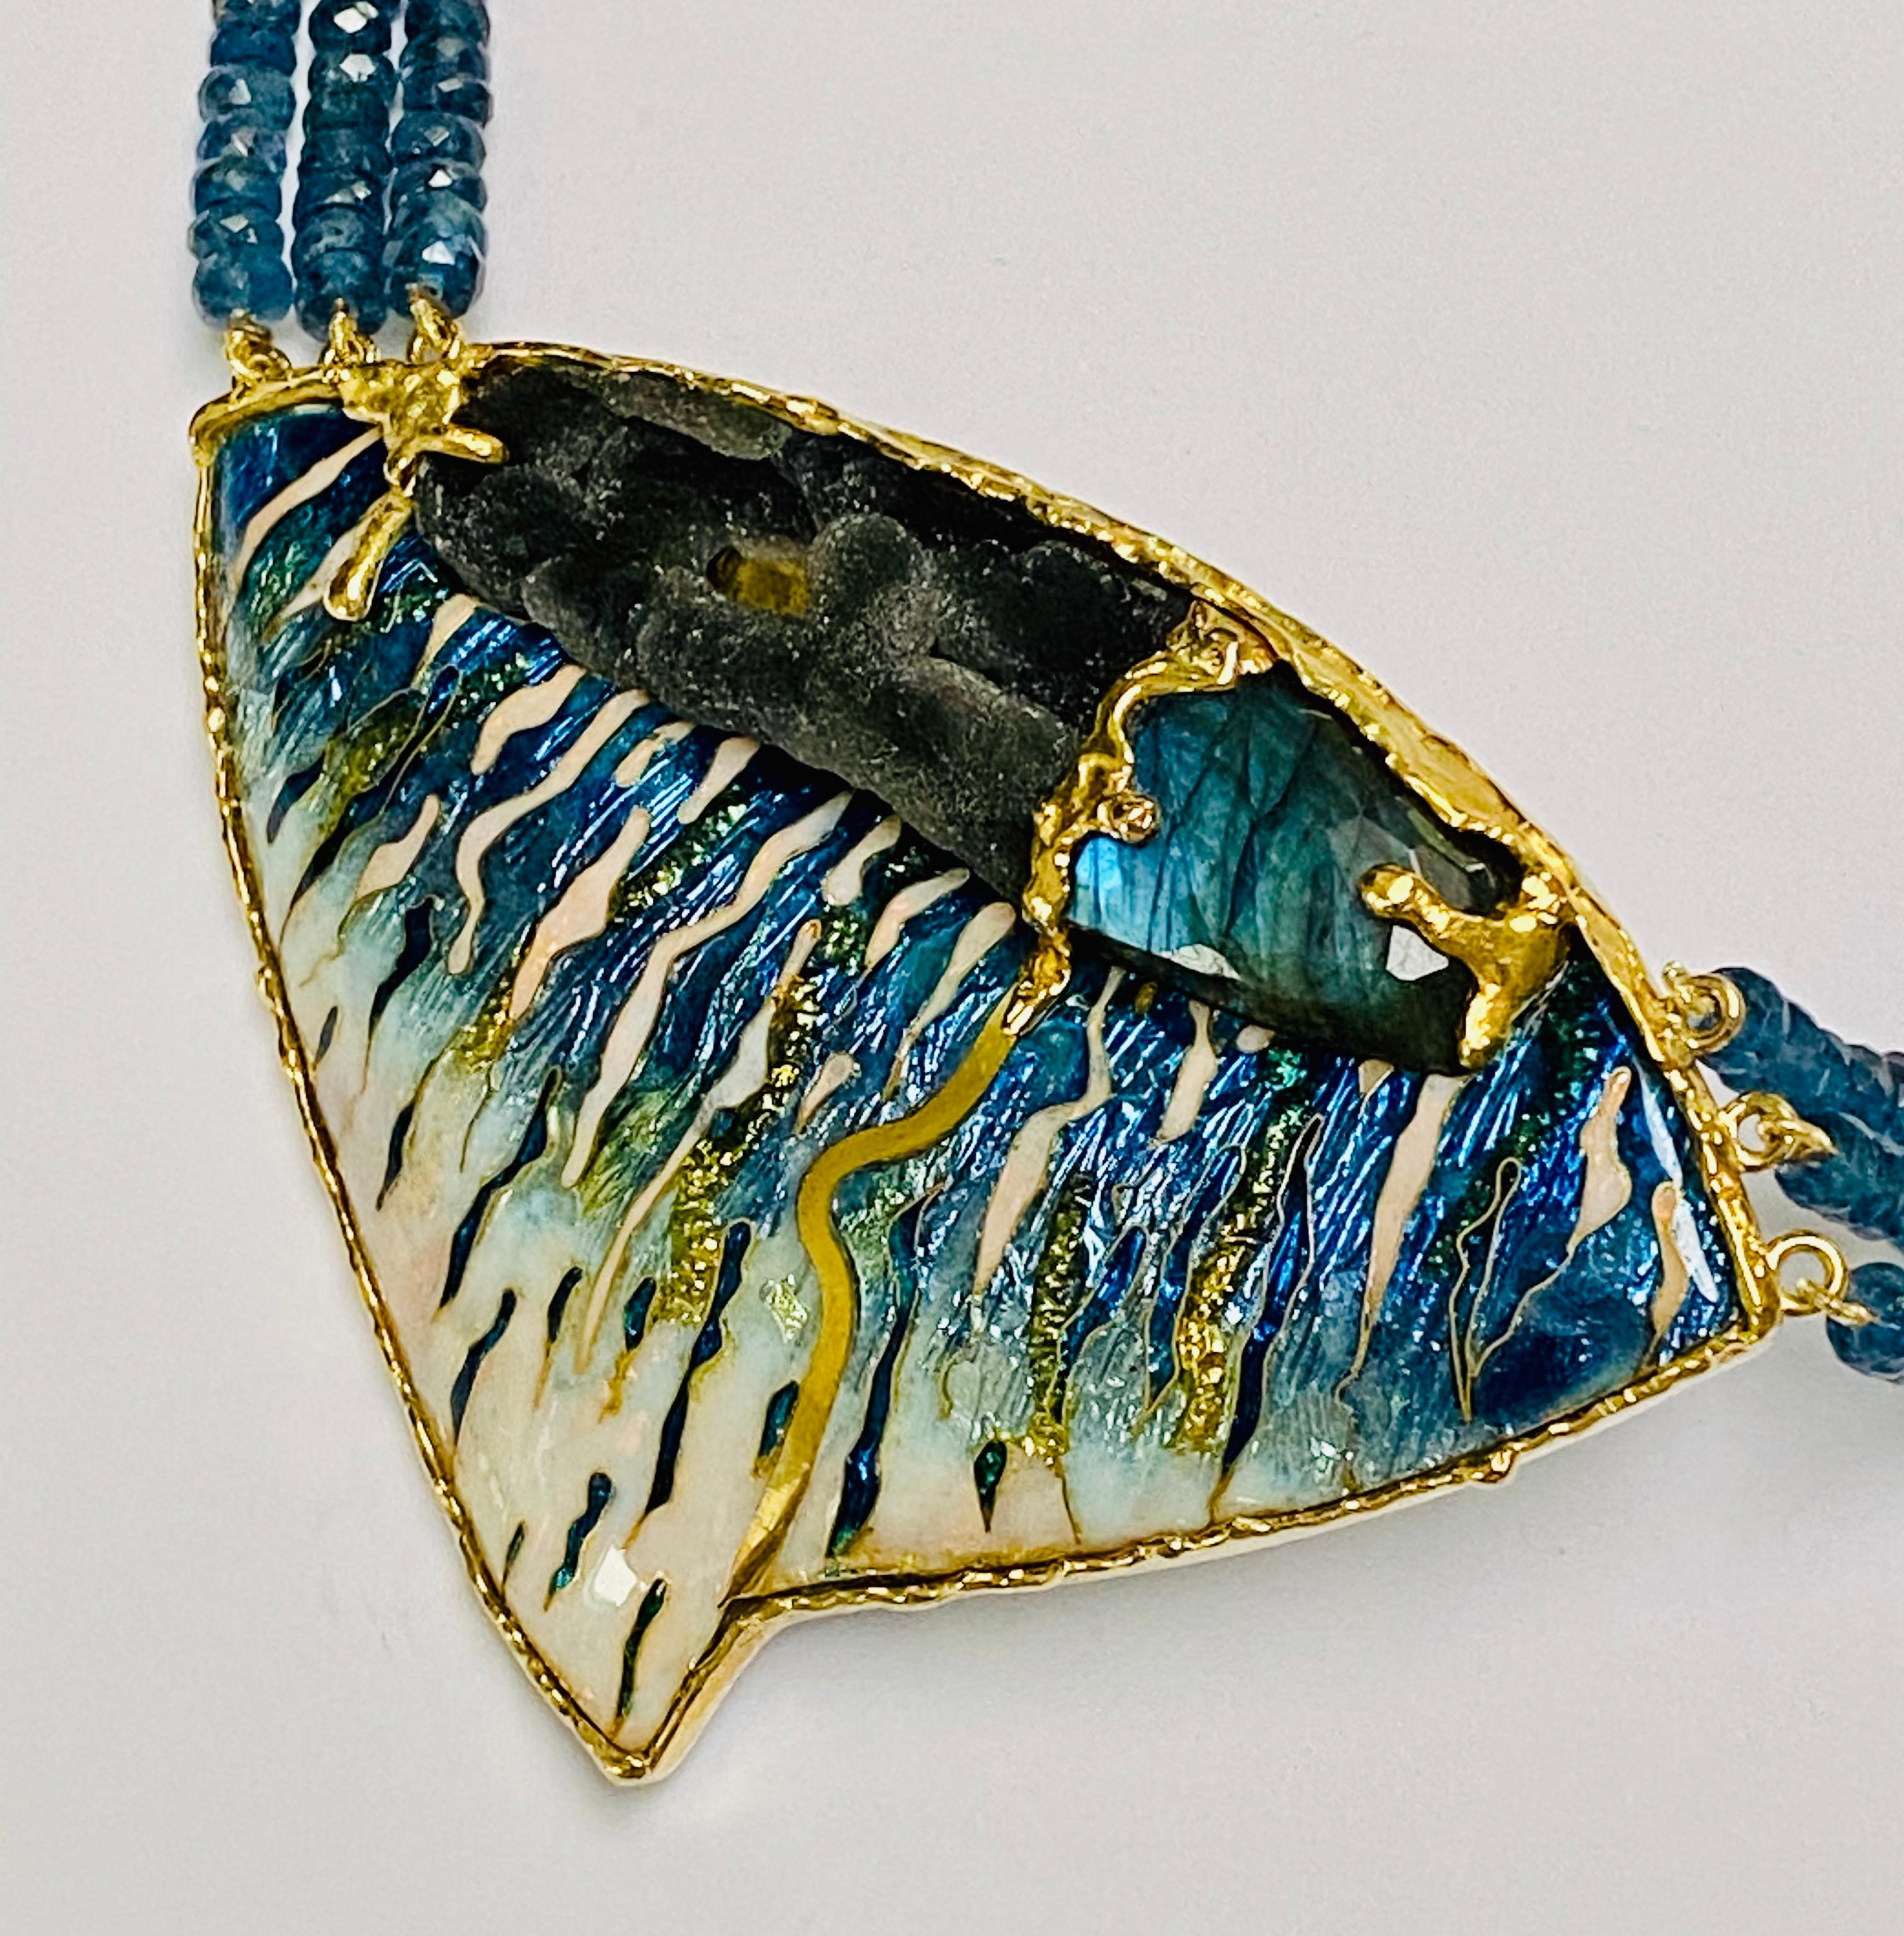 A very unusual contemporary choker necklace is a one-of-a-kind hand made piece of jewellery. The centrepiece is of cloisonné enamel embellished with a distinctive piece of druzy quartz and labradorite. Debbie uses the enamel, gold and stones to